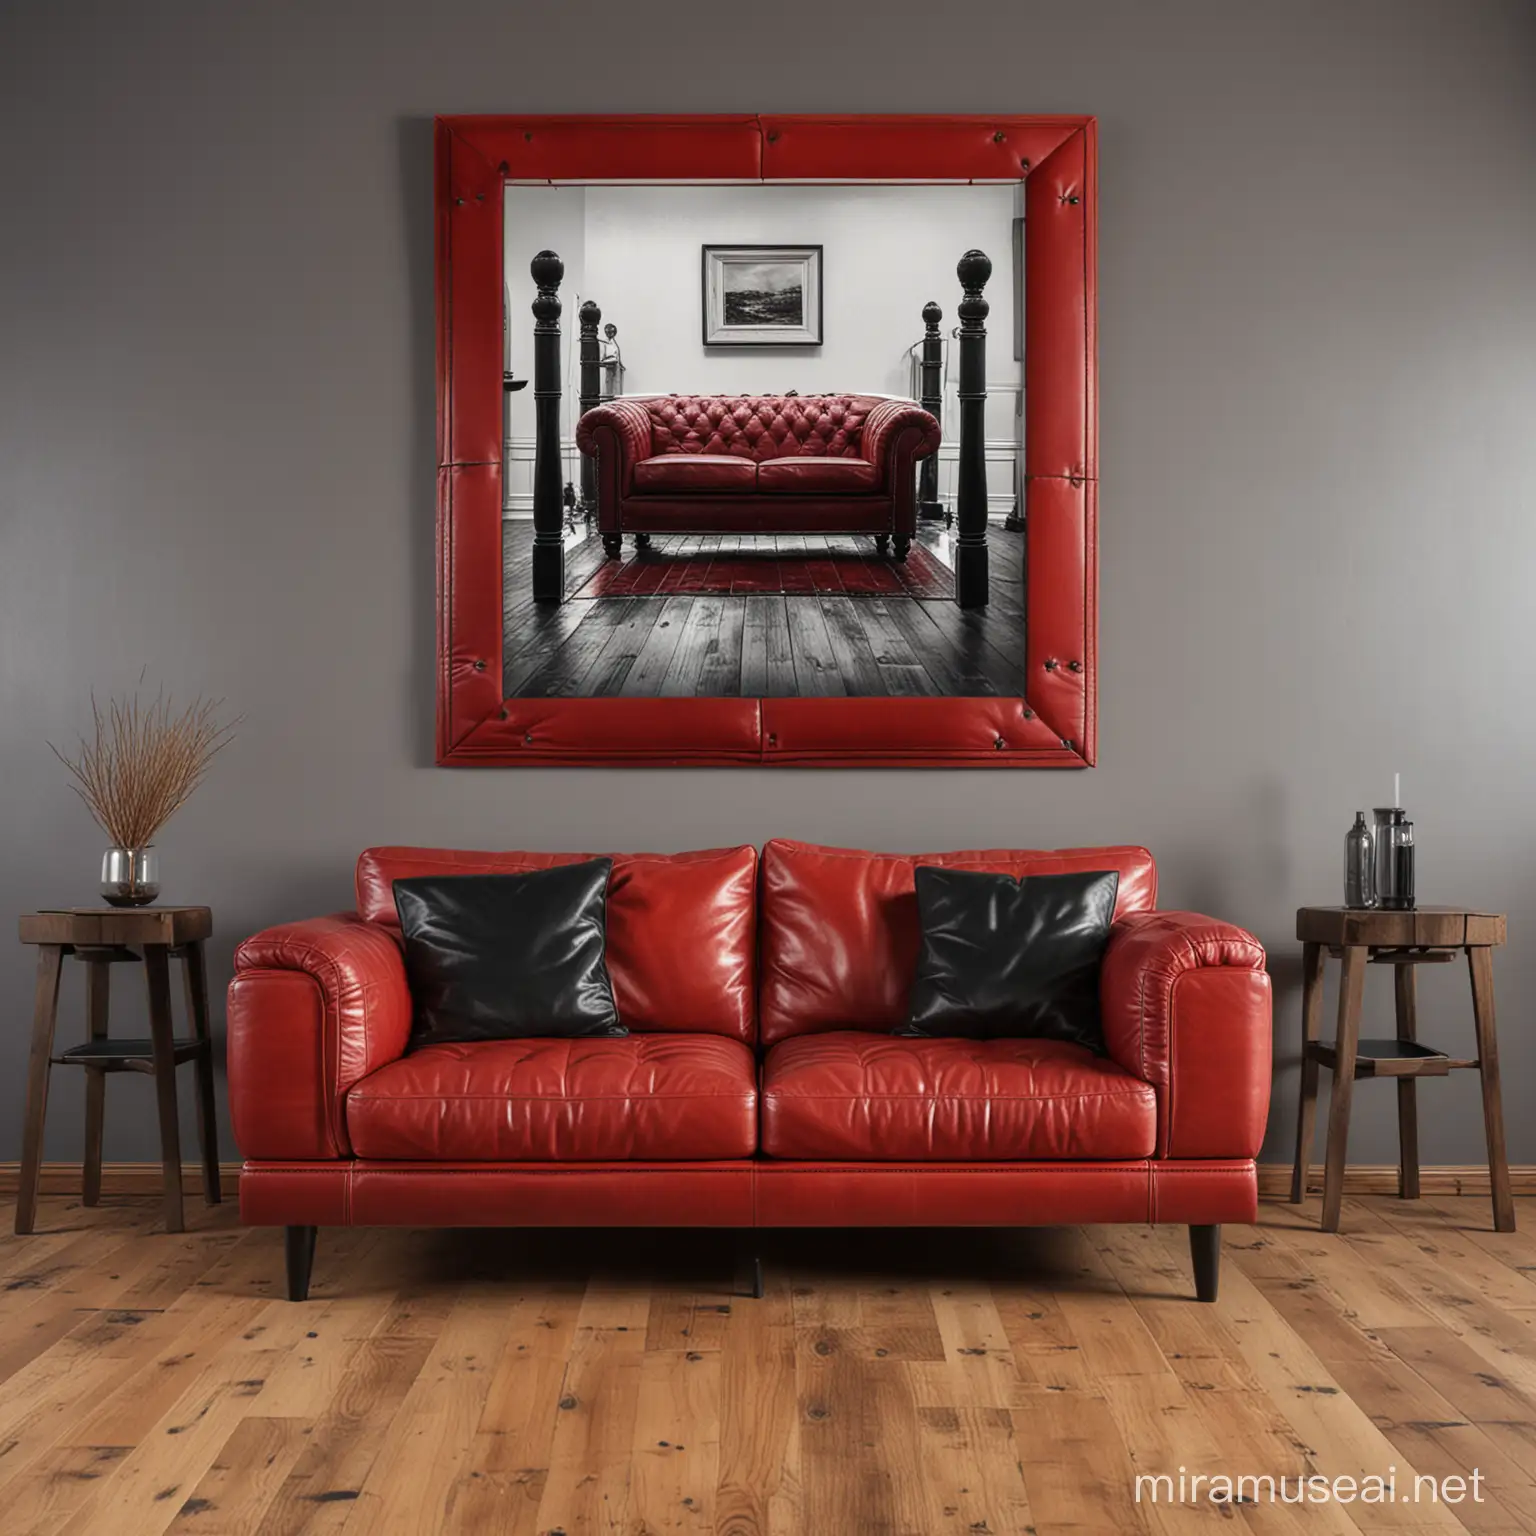 Cozy Living Room with Red Leather Sofa and Detailed Artwork